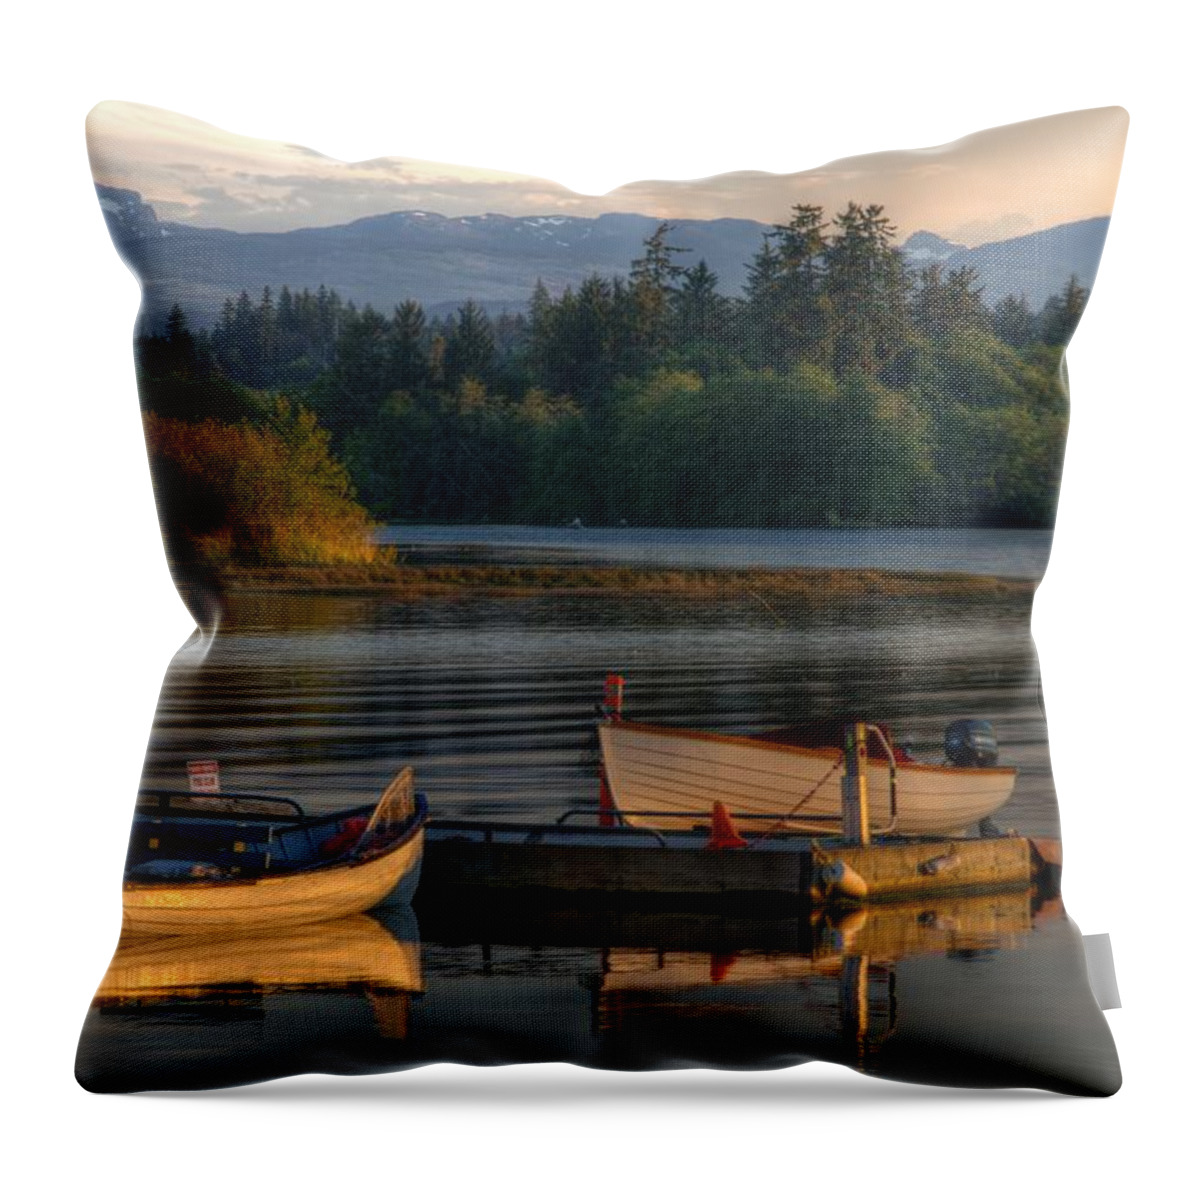 Tyee Throw Pillow featuring the photograph Sunset Tyee Boats by Kathy Paynter